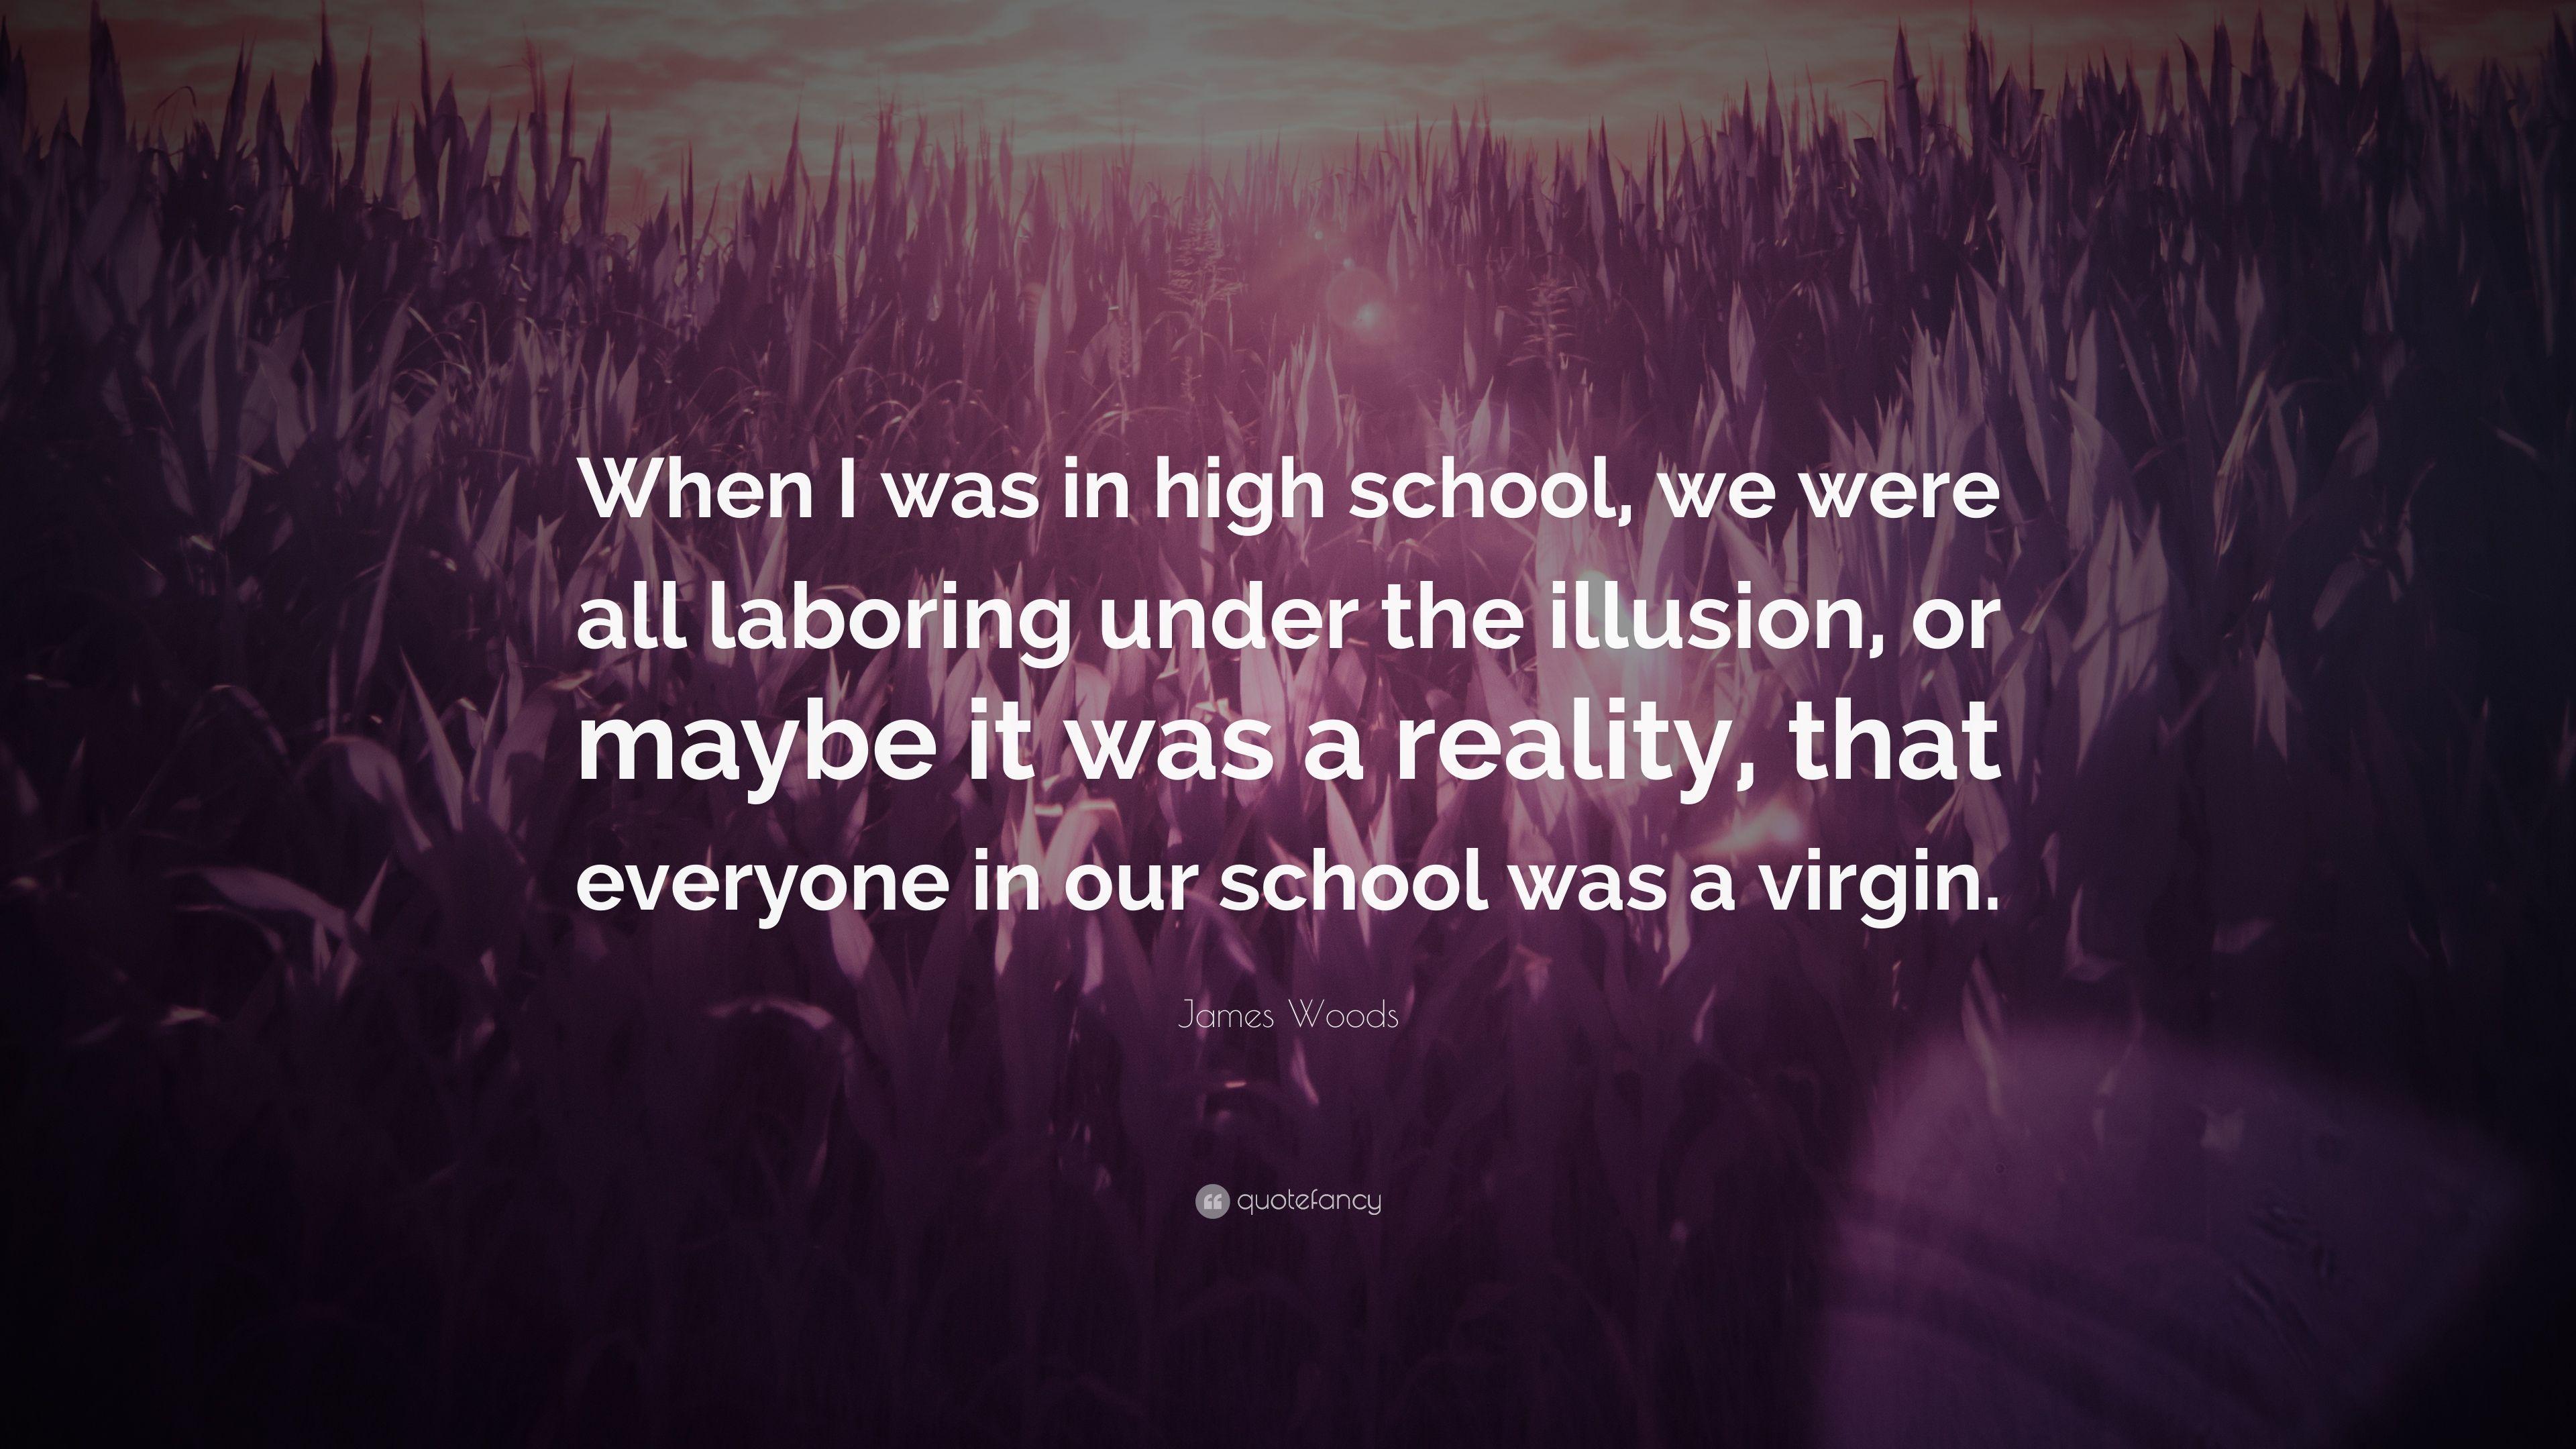 James Woods Quote: “When I was in high school, we were all